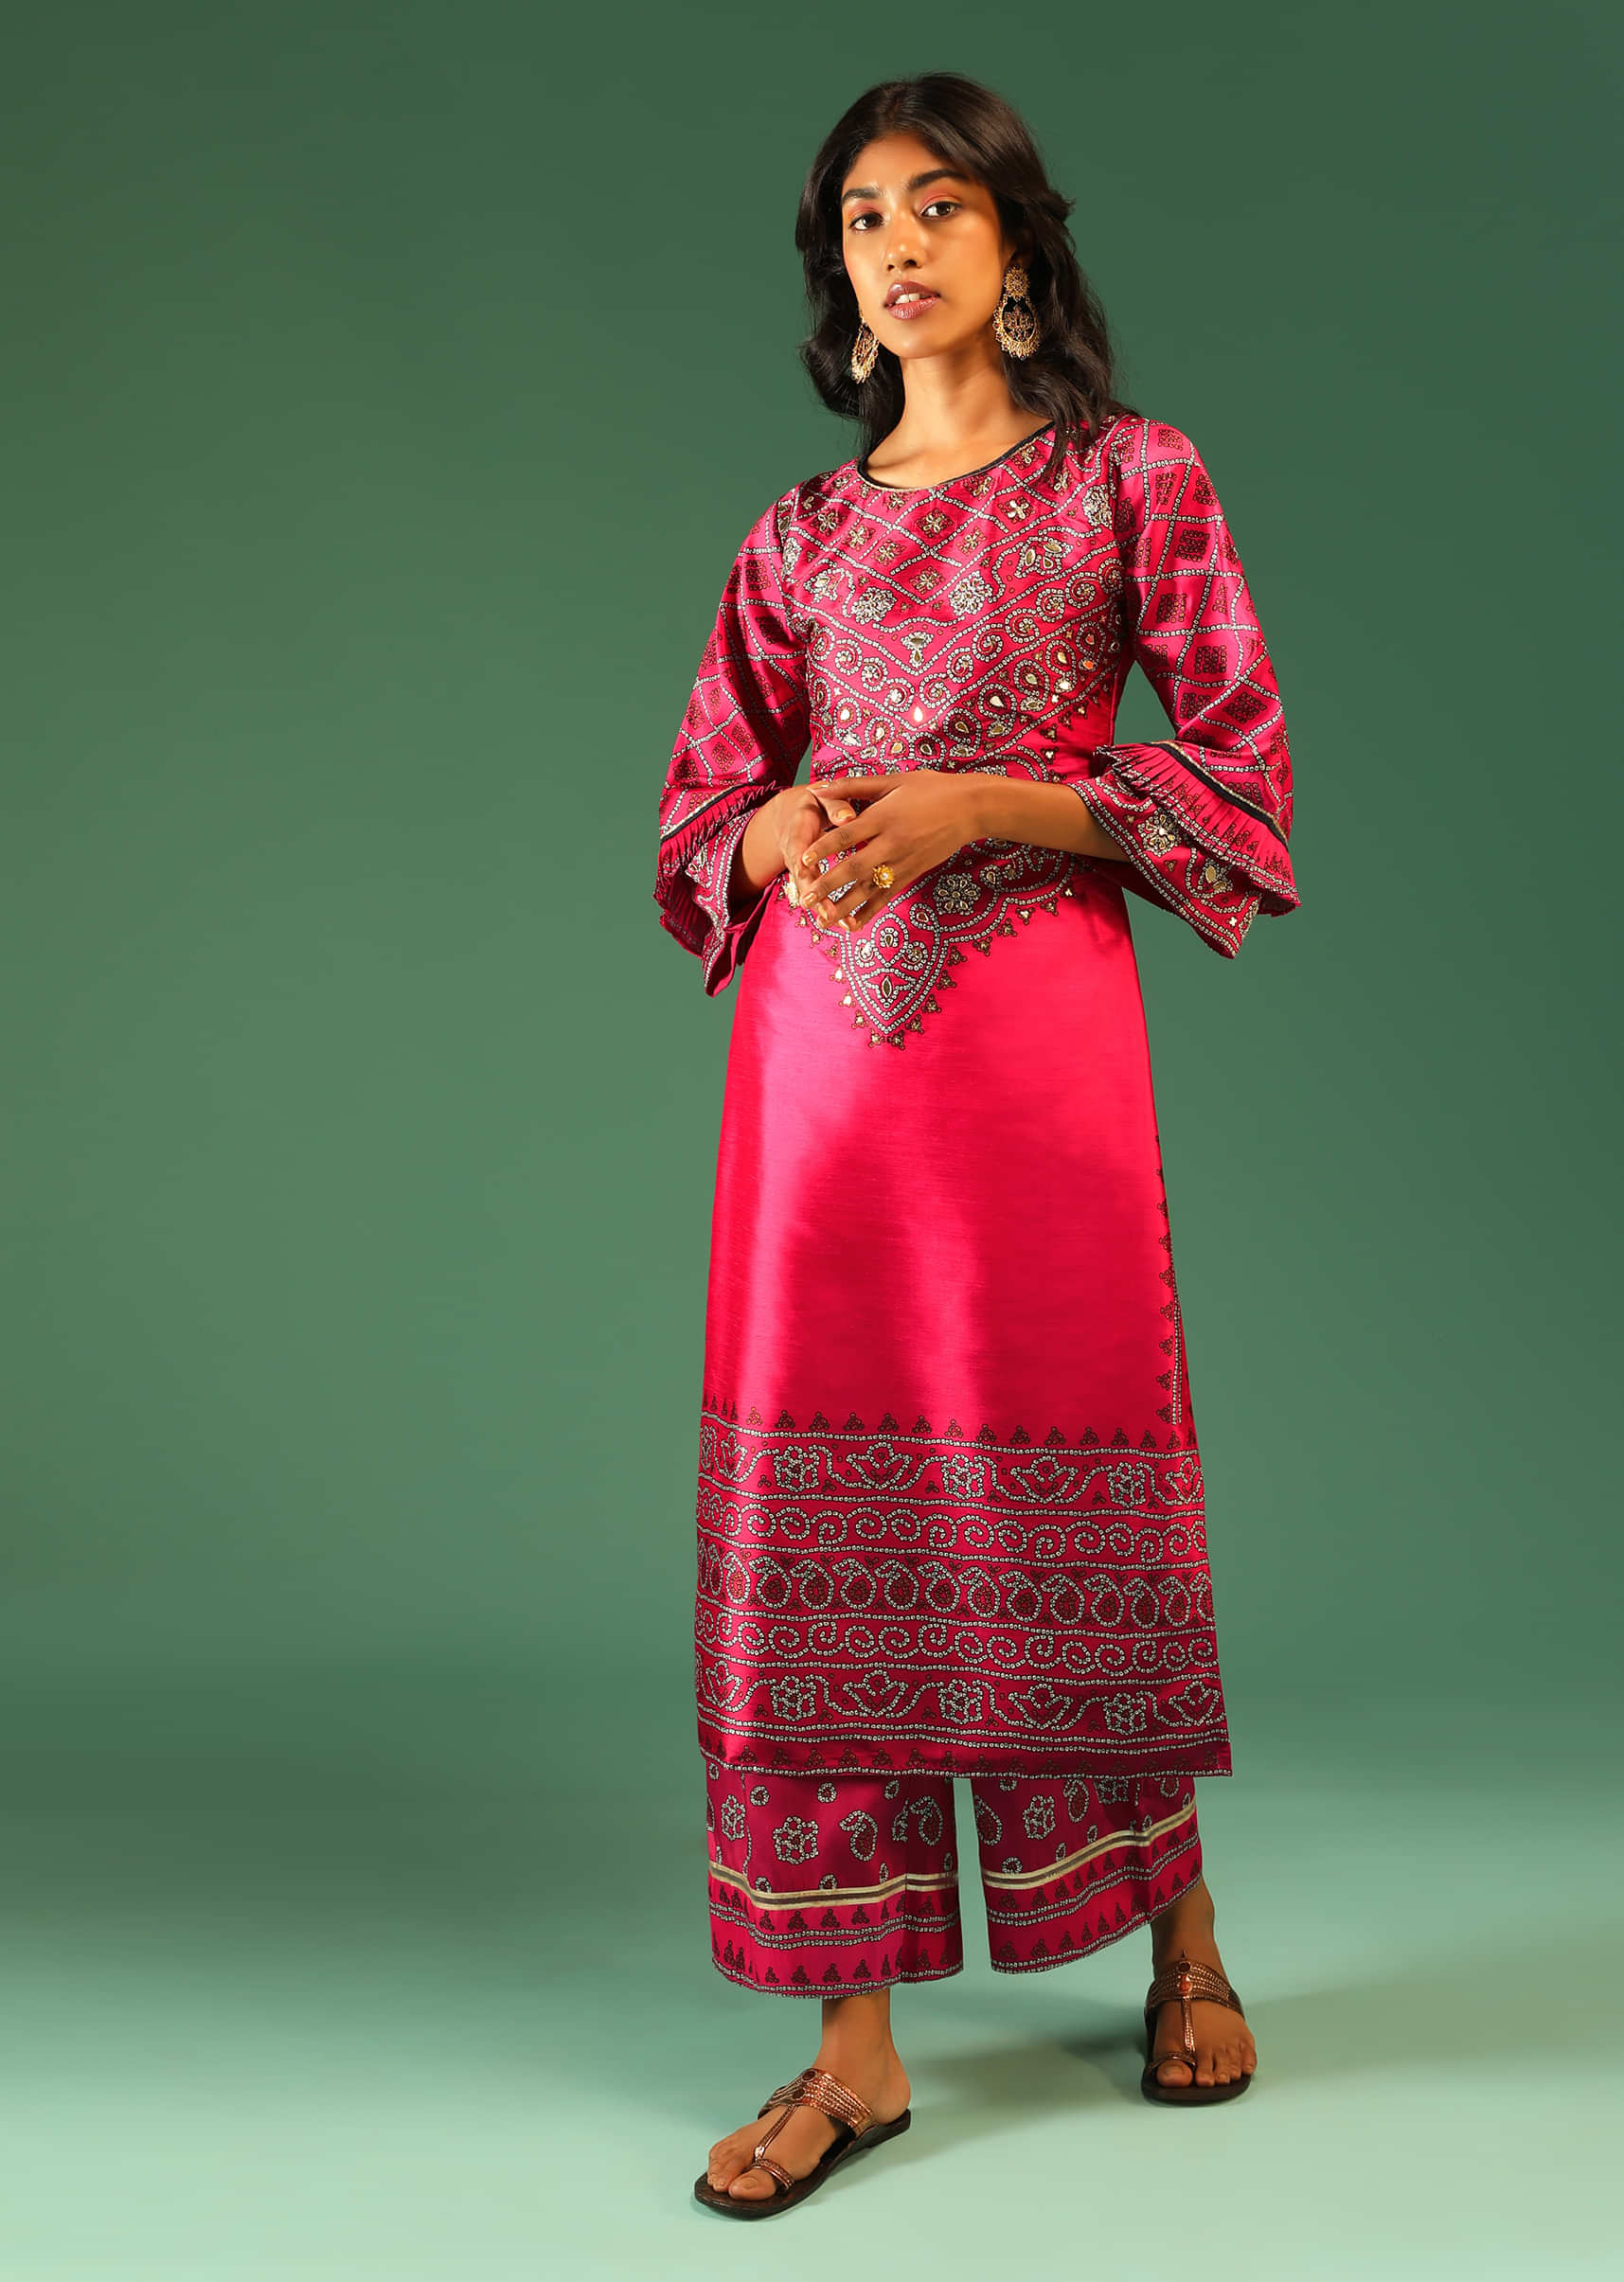 Hot Pink Palazzo Suit In Silk With Digital Printed Bandhani And Foil Work Along With Ruffle Sleeves  